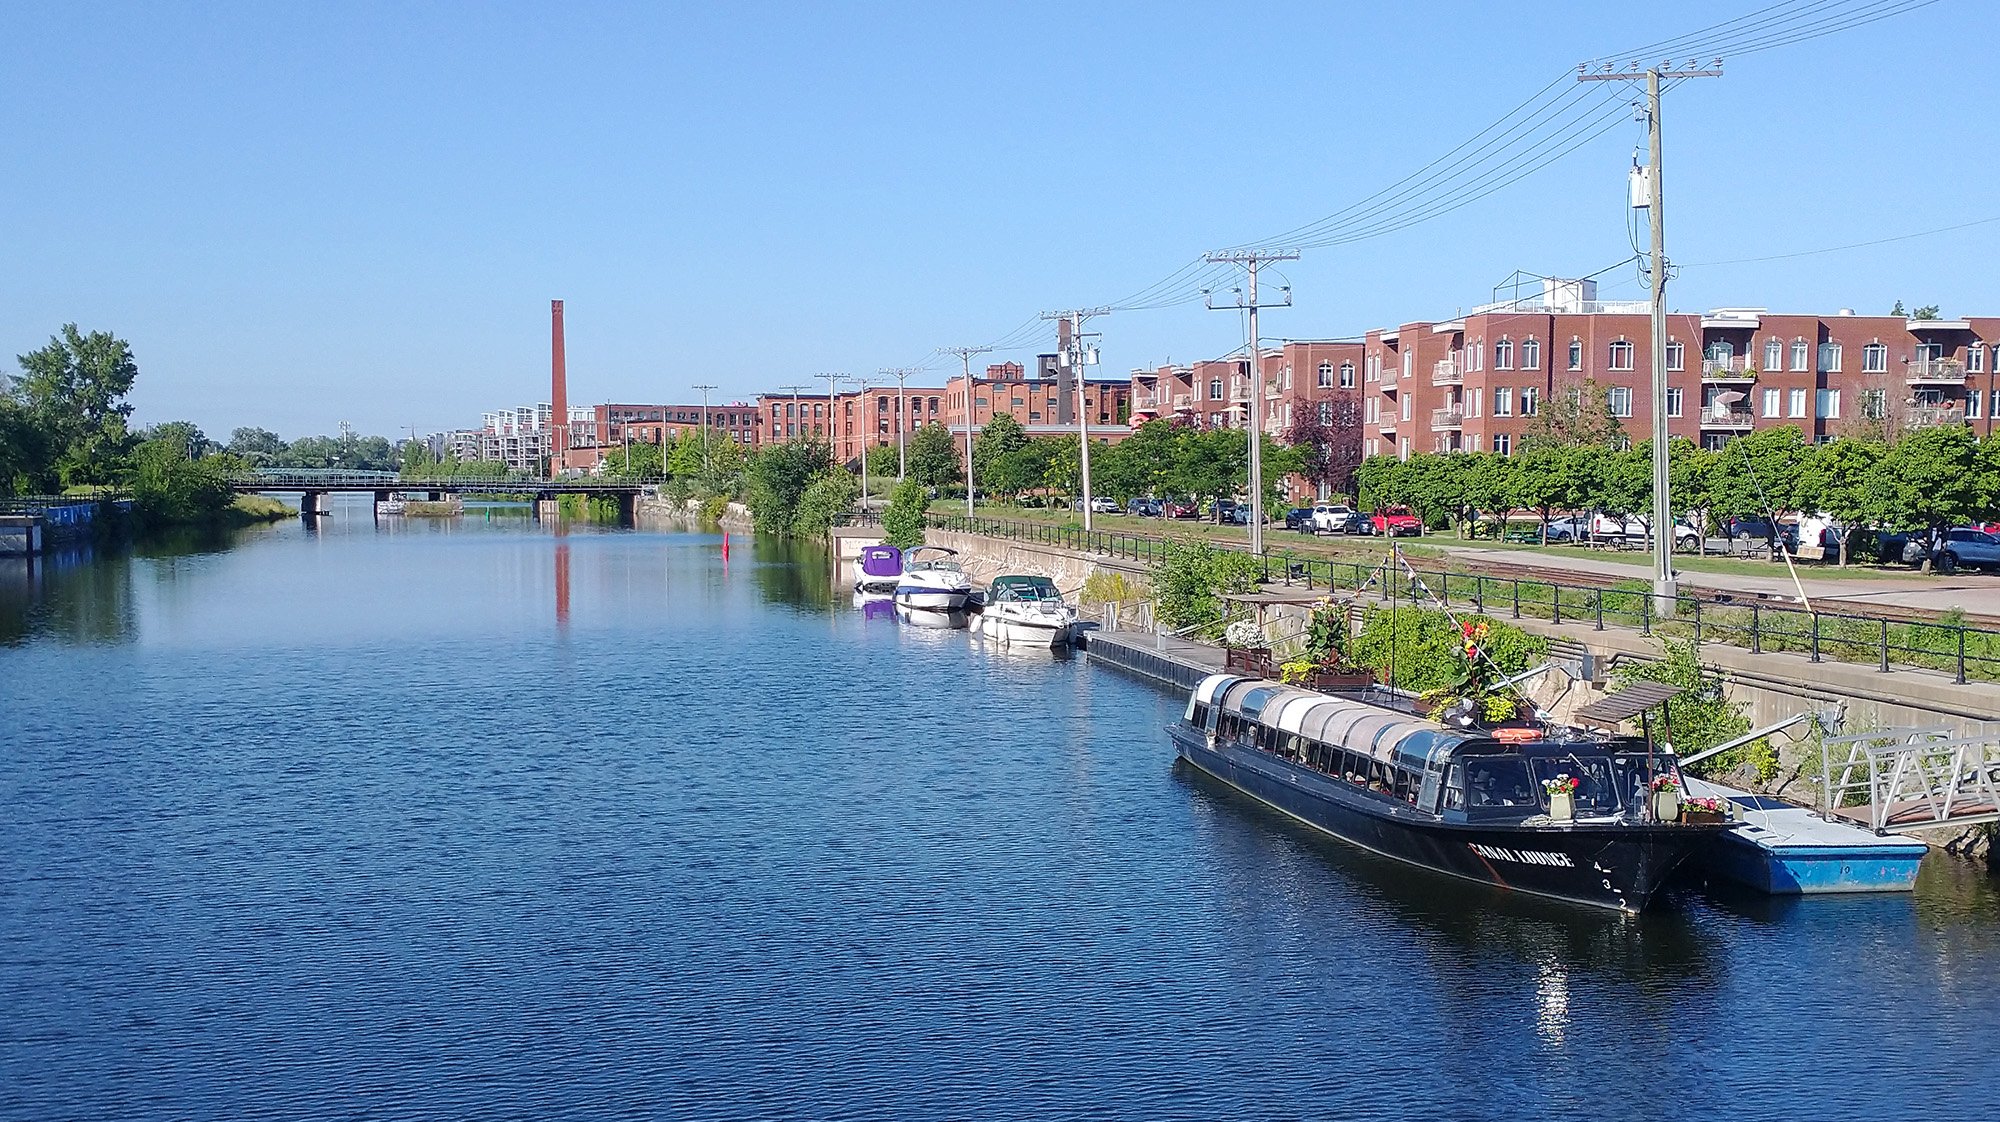 Lachine Canal with a "Bateau Mouche" which takes tourists up and down to view old buildings. I assume.